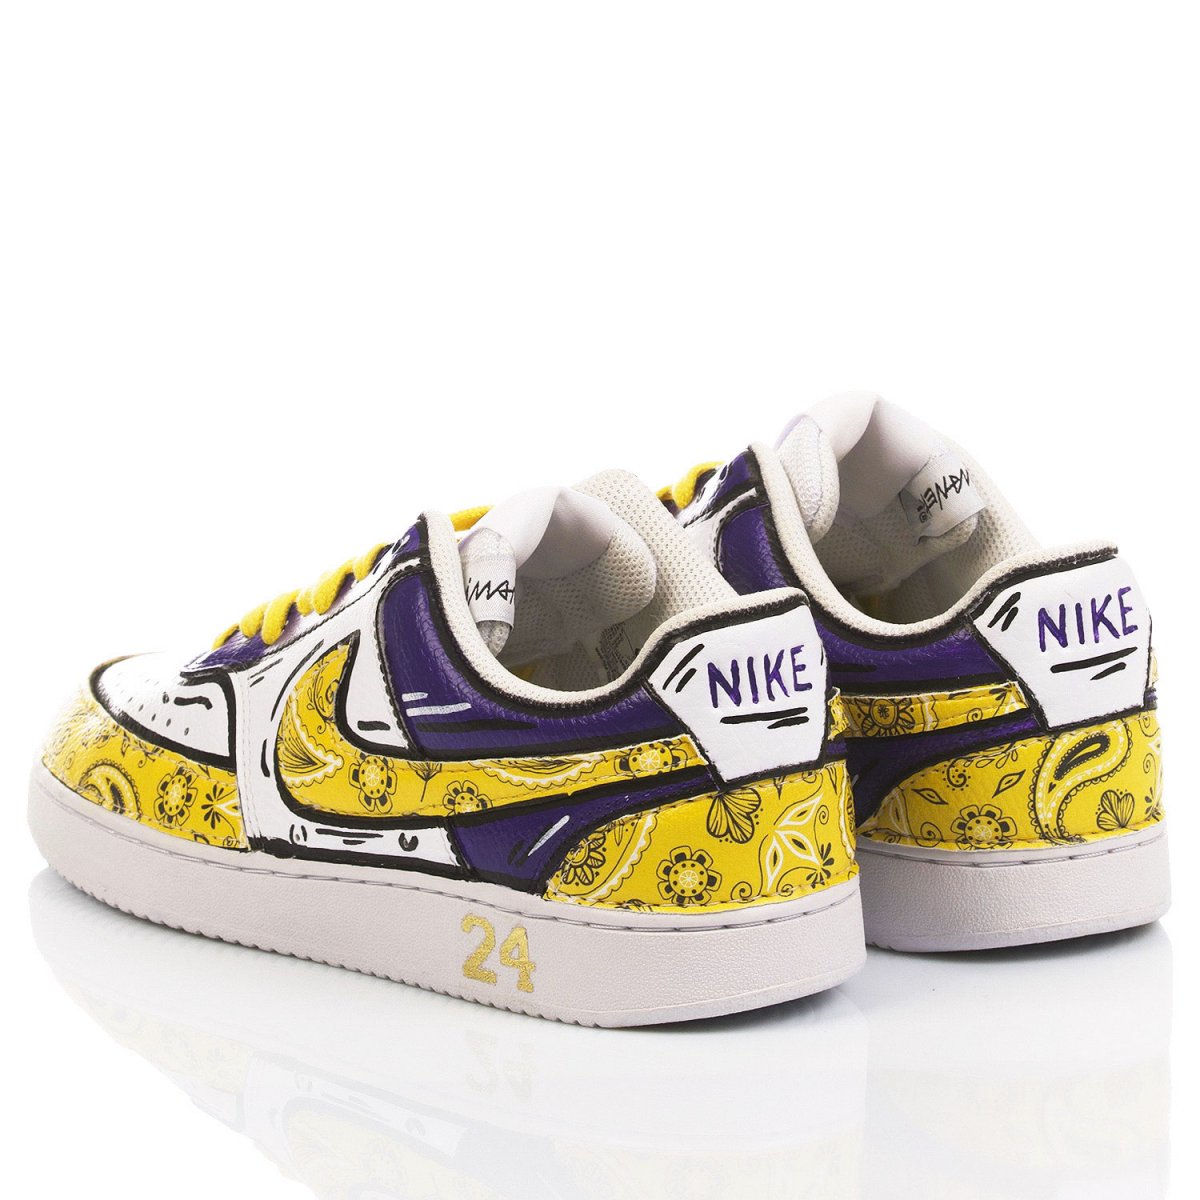 Nike Comics Los Angeles Air Force Vision Special